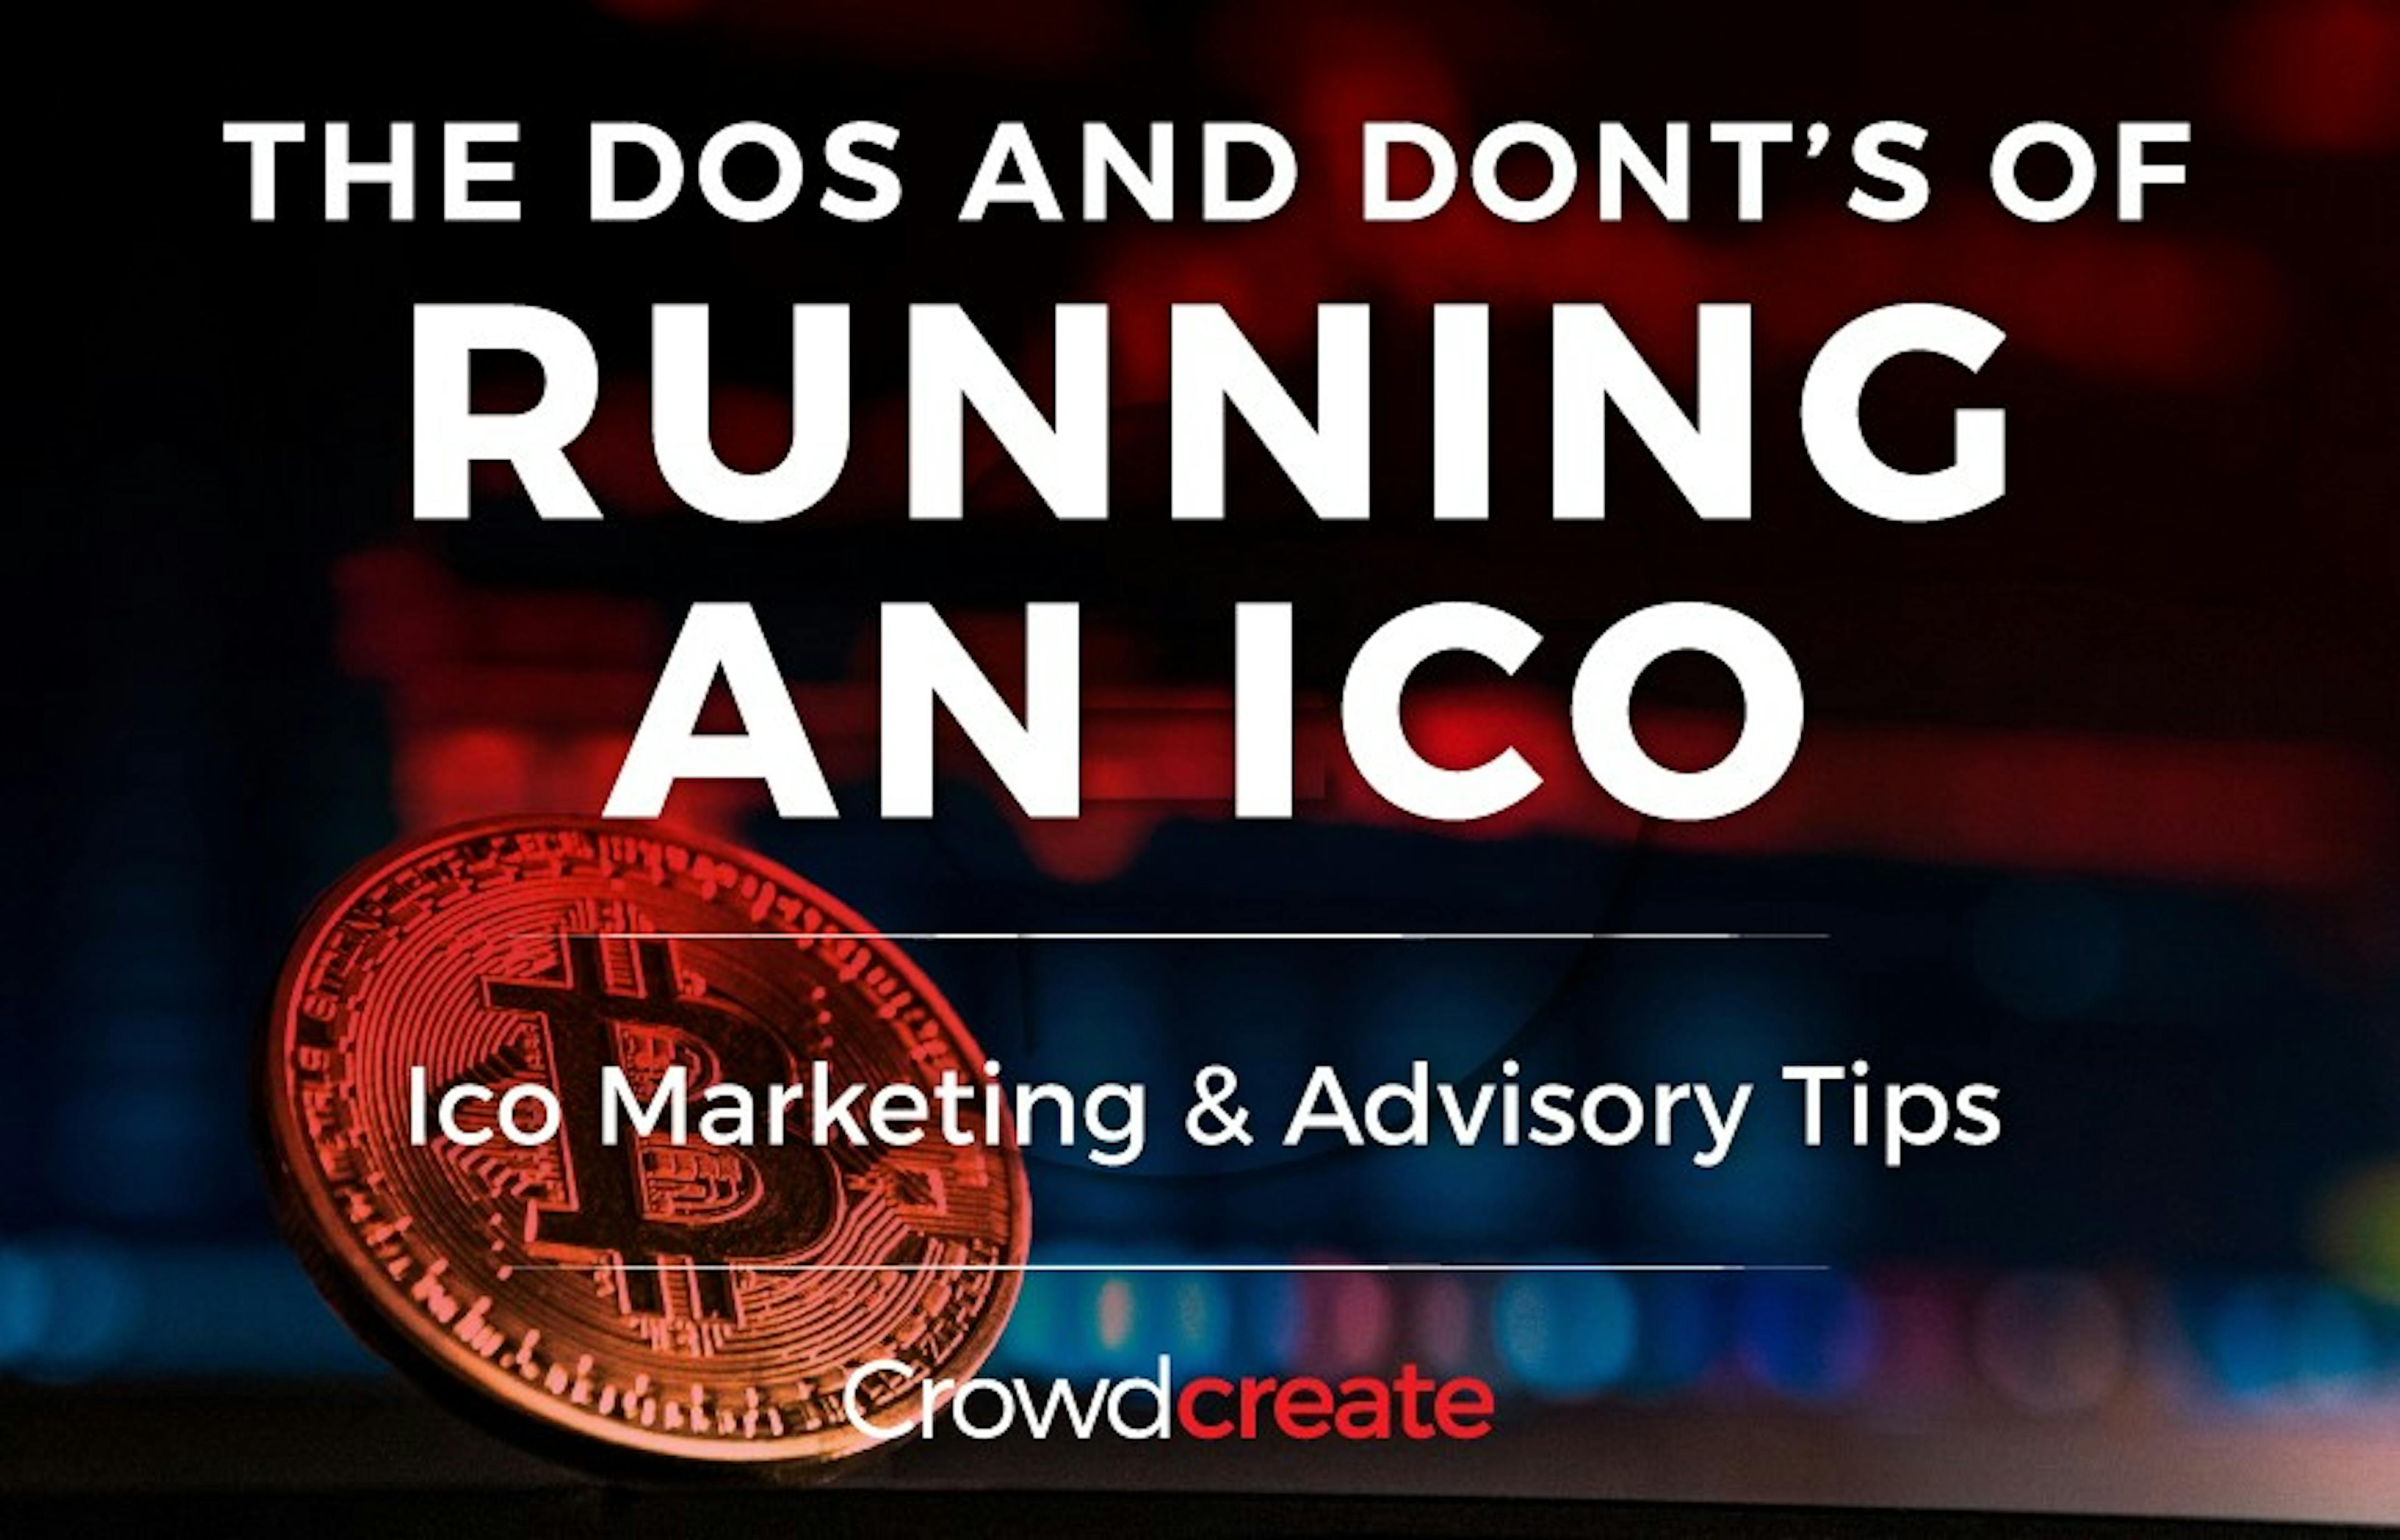 /the-dos-and-donts-of-running-an-ico-ico-marketing-and-advisory-tips-c7def6659362 feature image